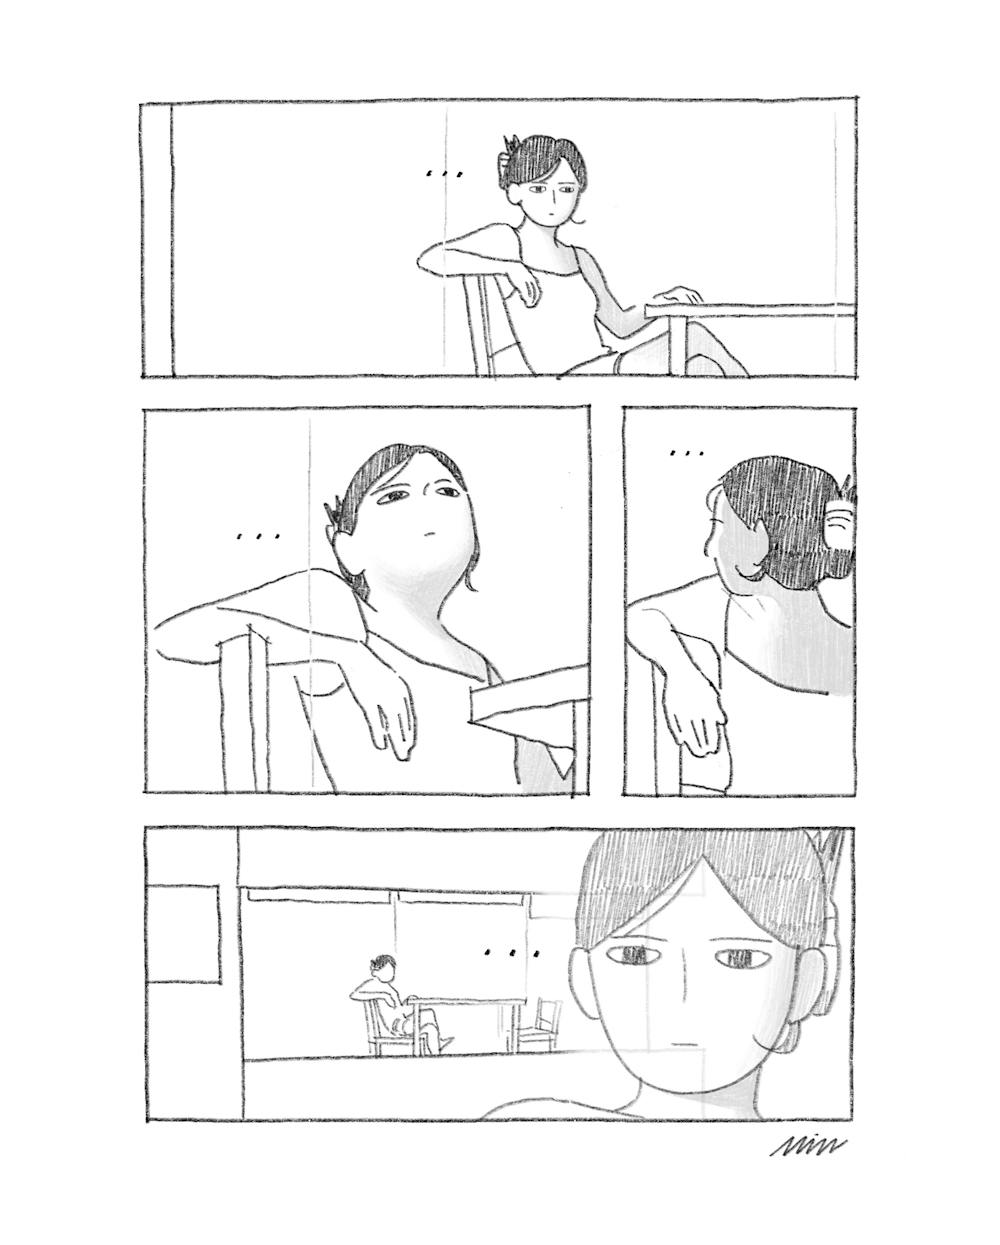 A four panel black and white sketched cartoon by Senior Cartoonist Paige Min titled Senioritis. The top panel shows a girl with dark hair in a bun sitting at a table staring off into space with an ellipsis next to her head. The next panel shows her doing the same looking up. The final panel shows her face, semi-transparent and zoomed in, on the right with a zoomed out view of her at the table in the background.